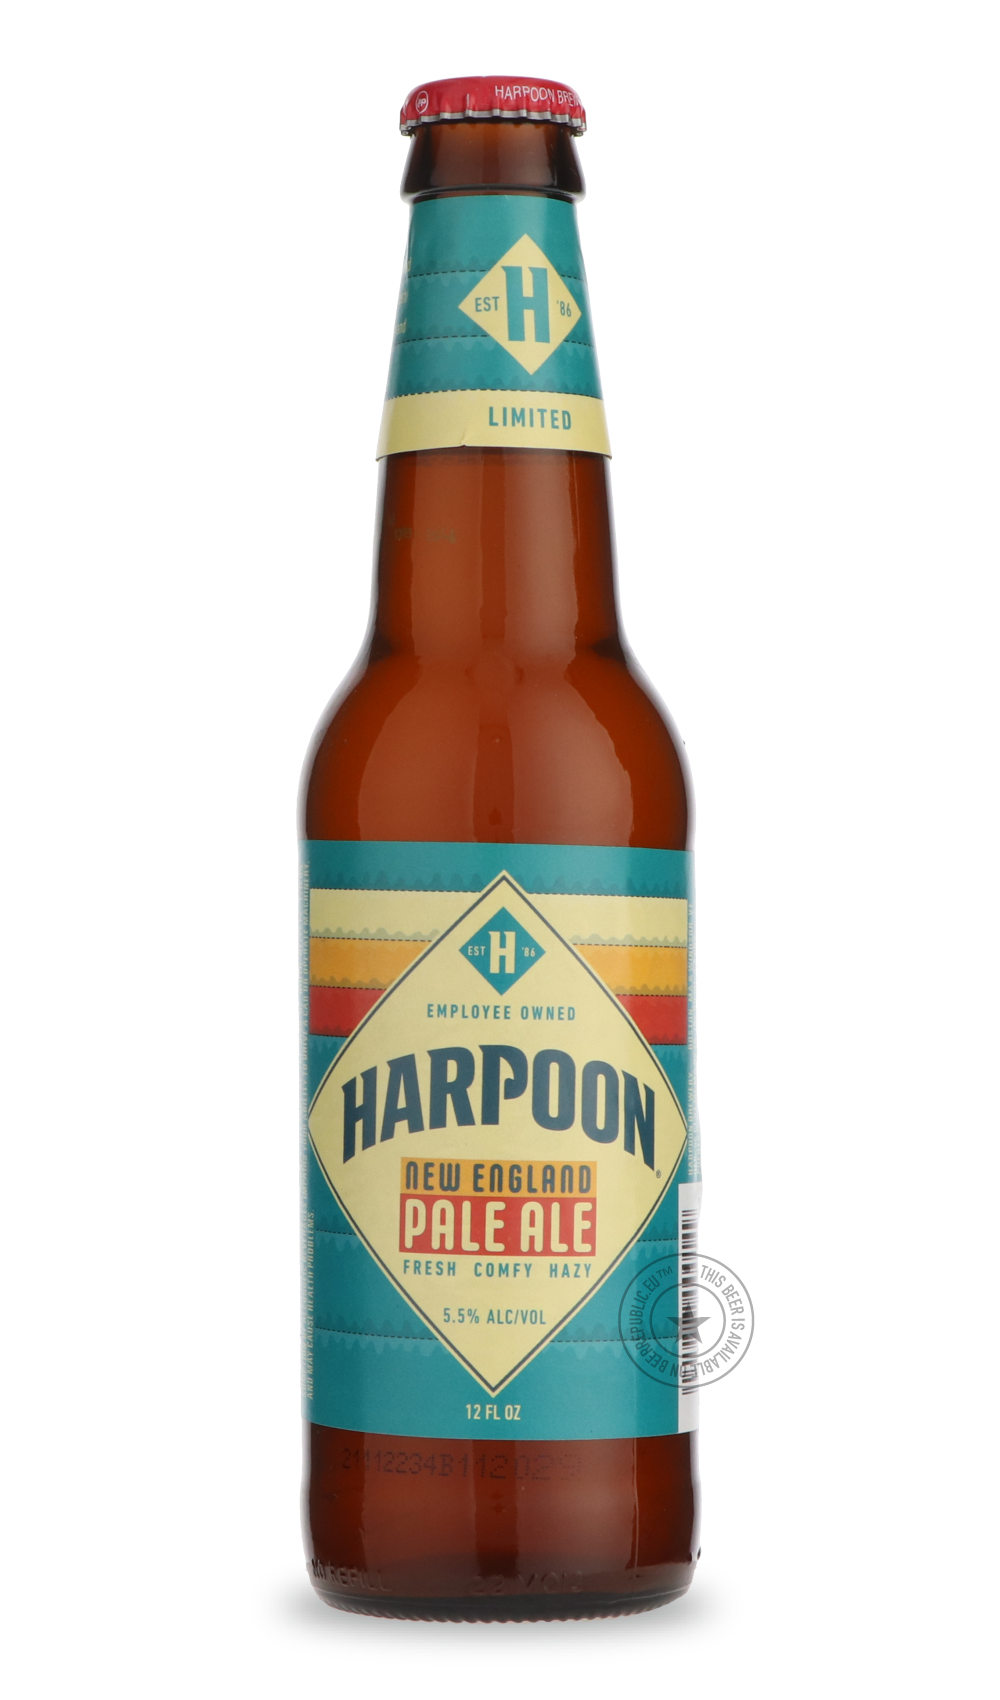 -Harpoon- New England Pale Ale-Pale- Only @ Beer Republic - The best online beer store for American & Canadian craft beer - Buy beer online from the USA and Canada - Bier online kopen - Amerikaans bier kopen - Craft beer store - Craft beer kopen - Amerikanisch bier kaufen - Bier online kaufen - Acheter biere online - IPA - Stout - Porter - New England IPA - Hazy IPA - Imperial Stout - Barrel Aged - Barrel Aged Imperial Stout - Brown - Dark beer - Blond - Blonde - Pilsner - Lager - Wheat - Weizen - Amber - B